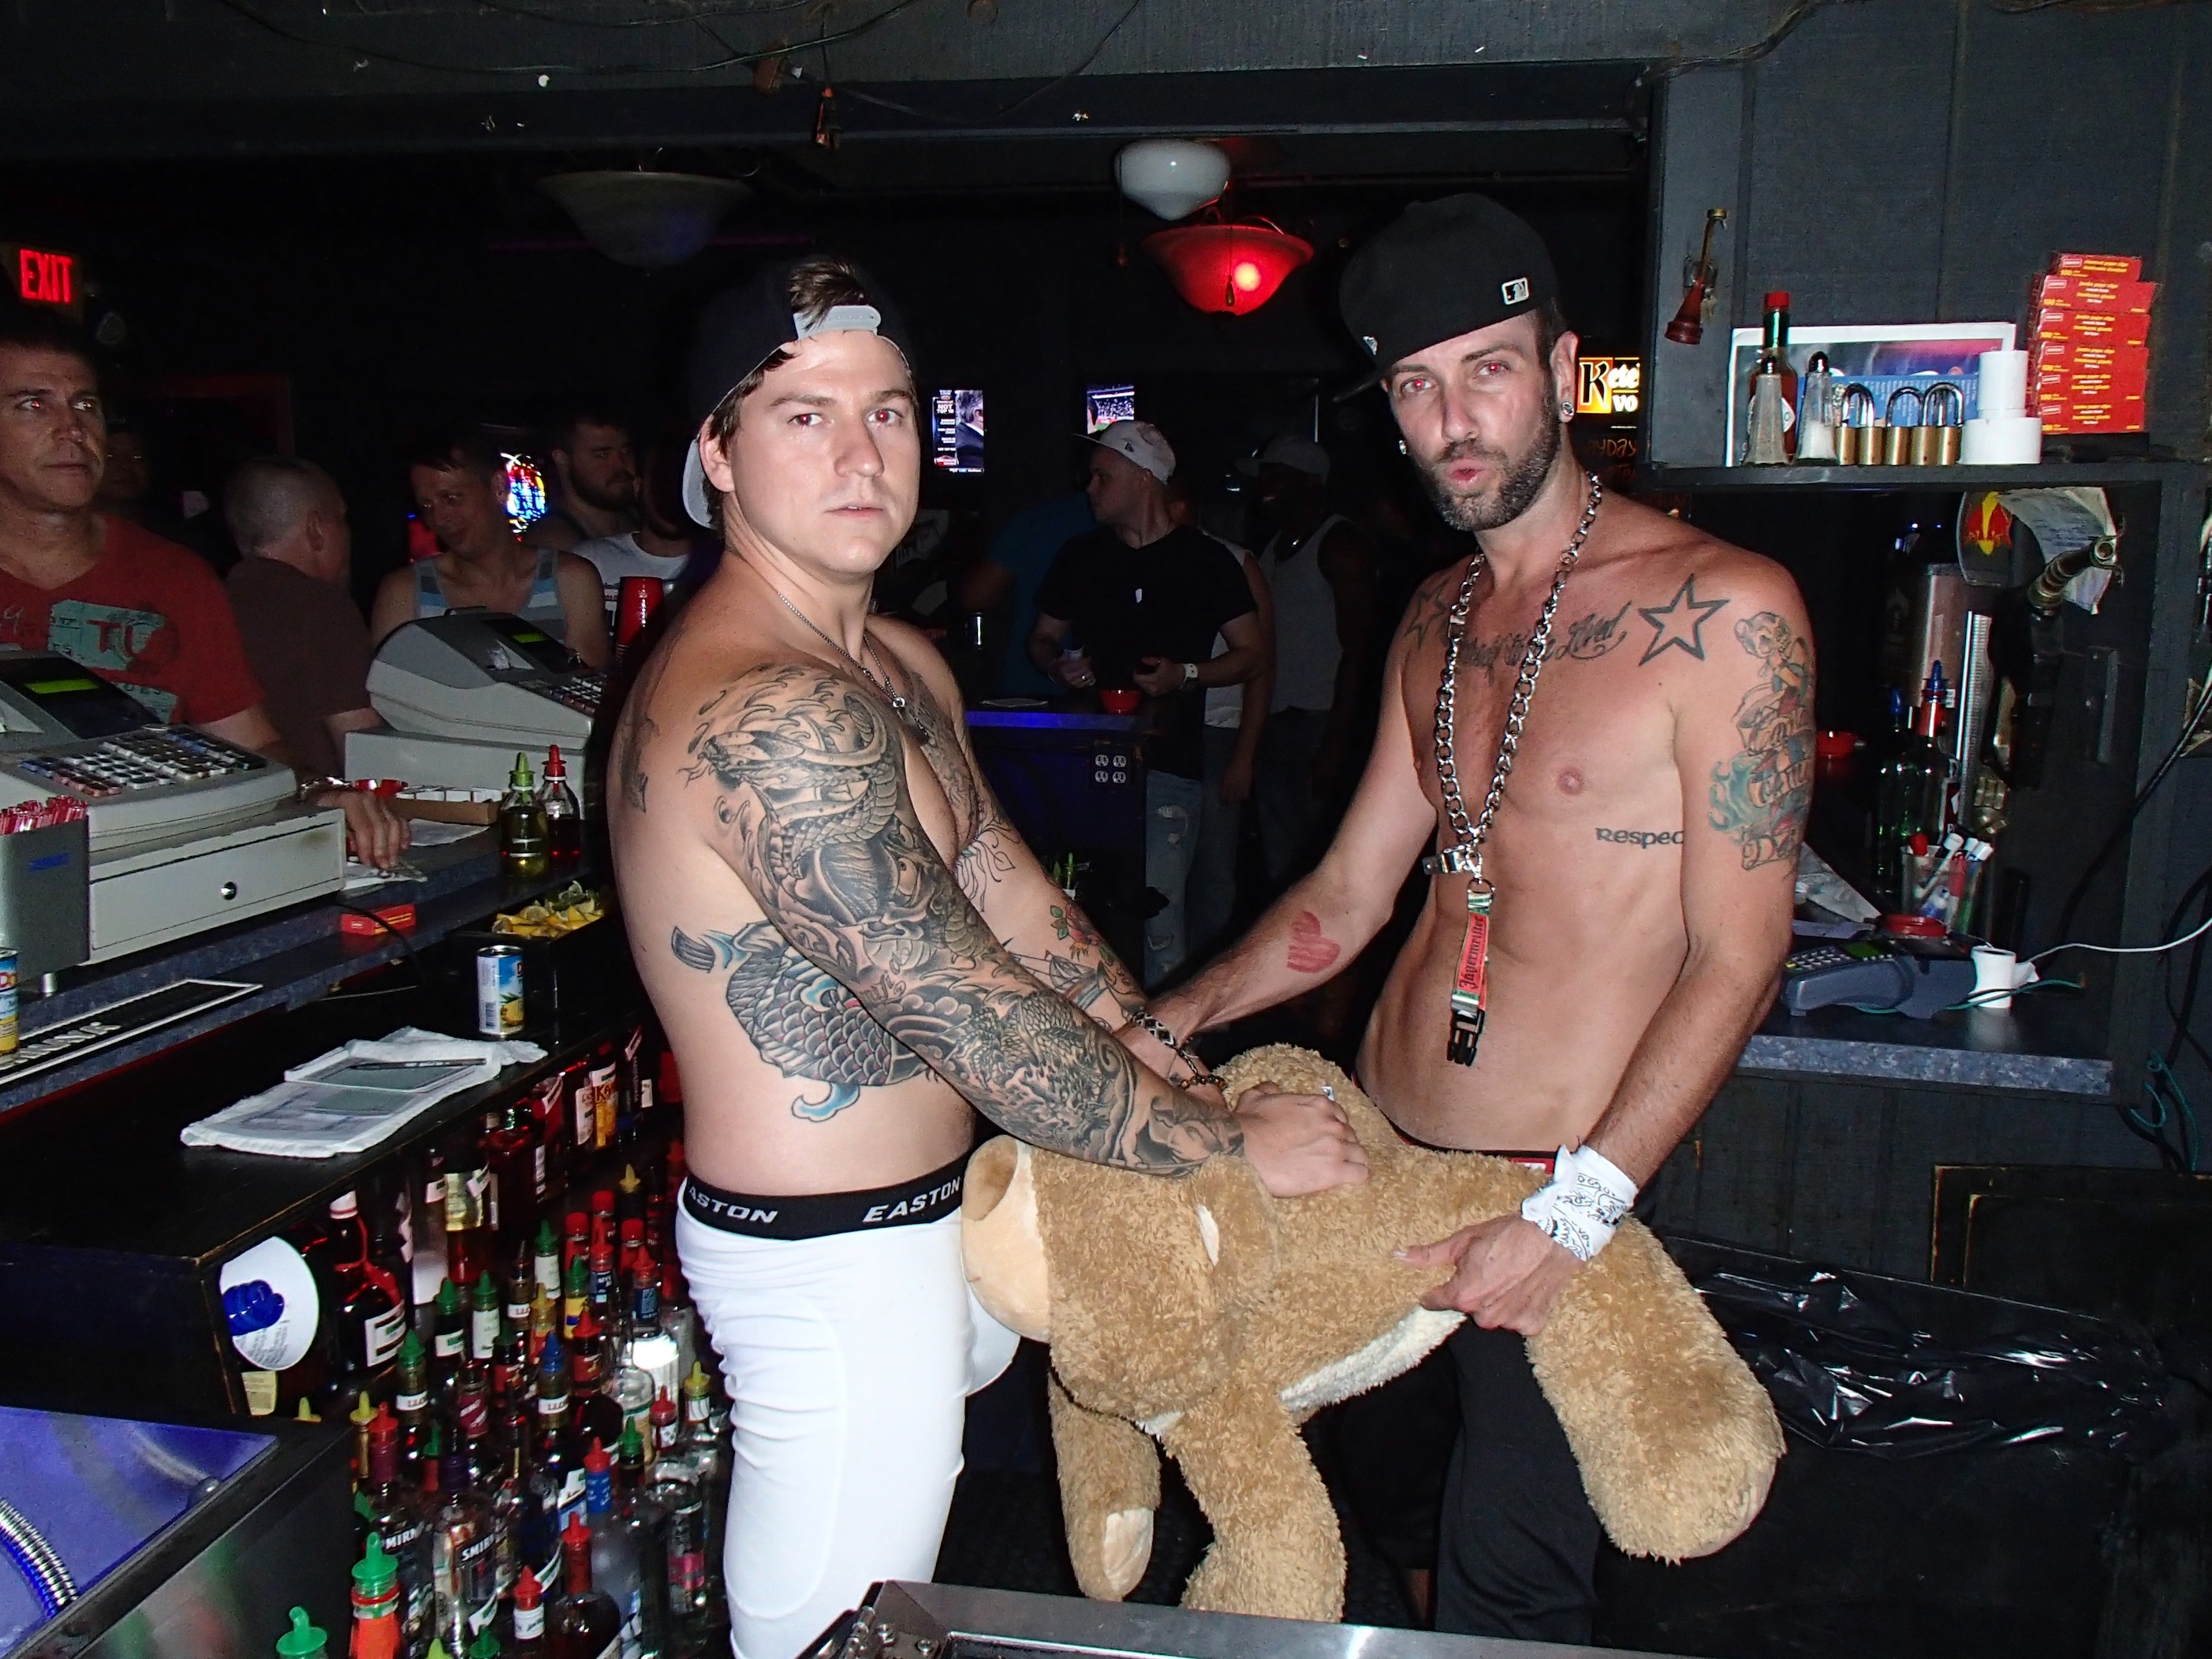 exclusive gay porn newcomer teddy bear hits rock bottom enters